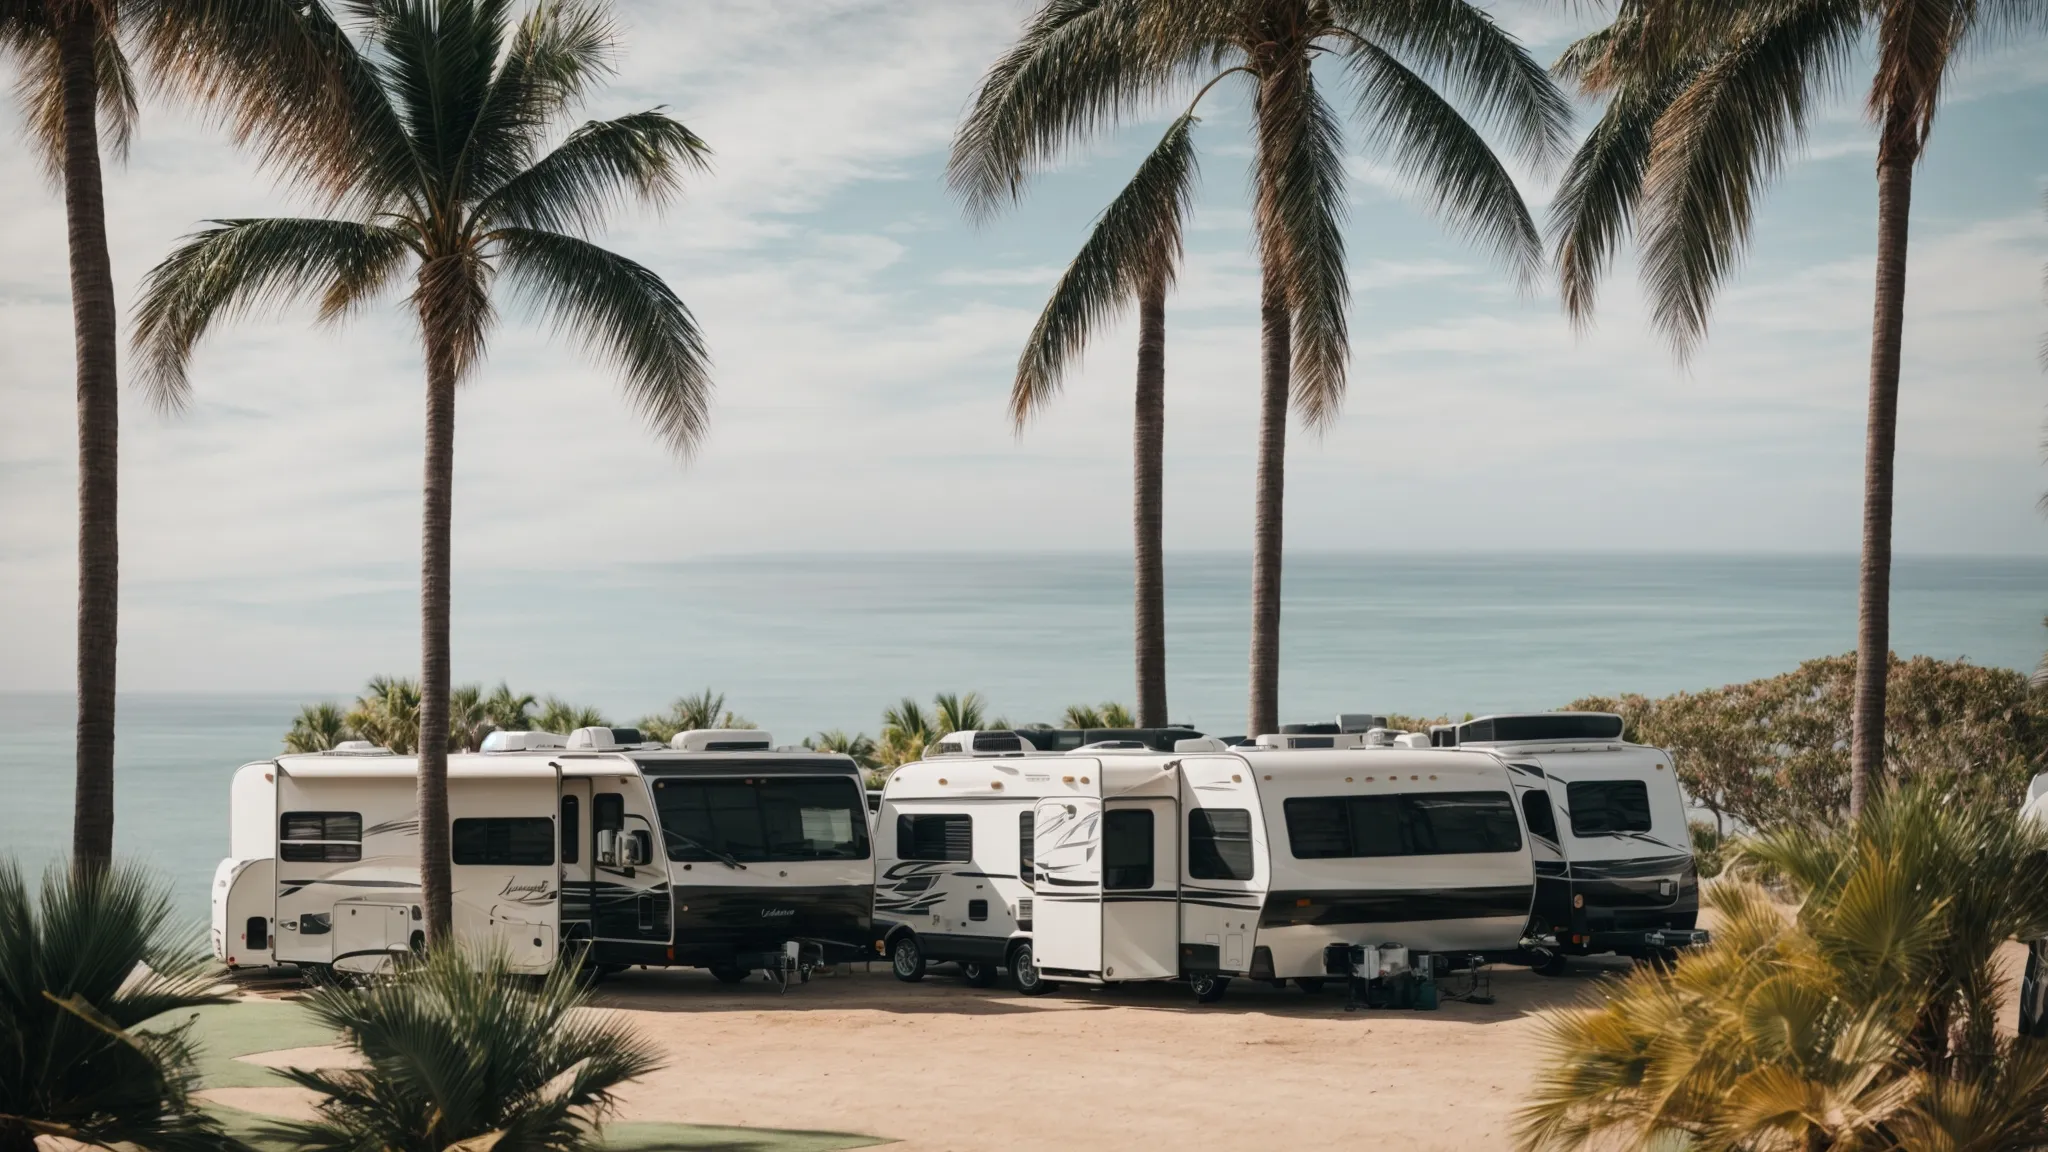 a line of diverse recreational vehicles parked amidst palm trees with a glimpse of the ocean horizon.